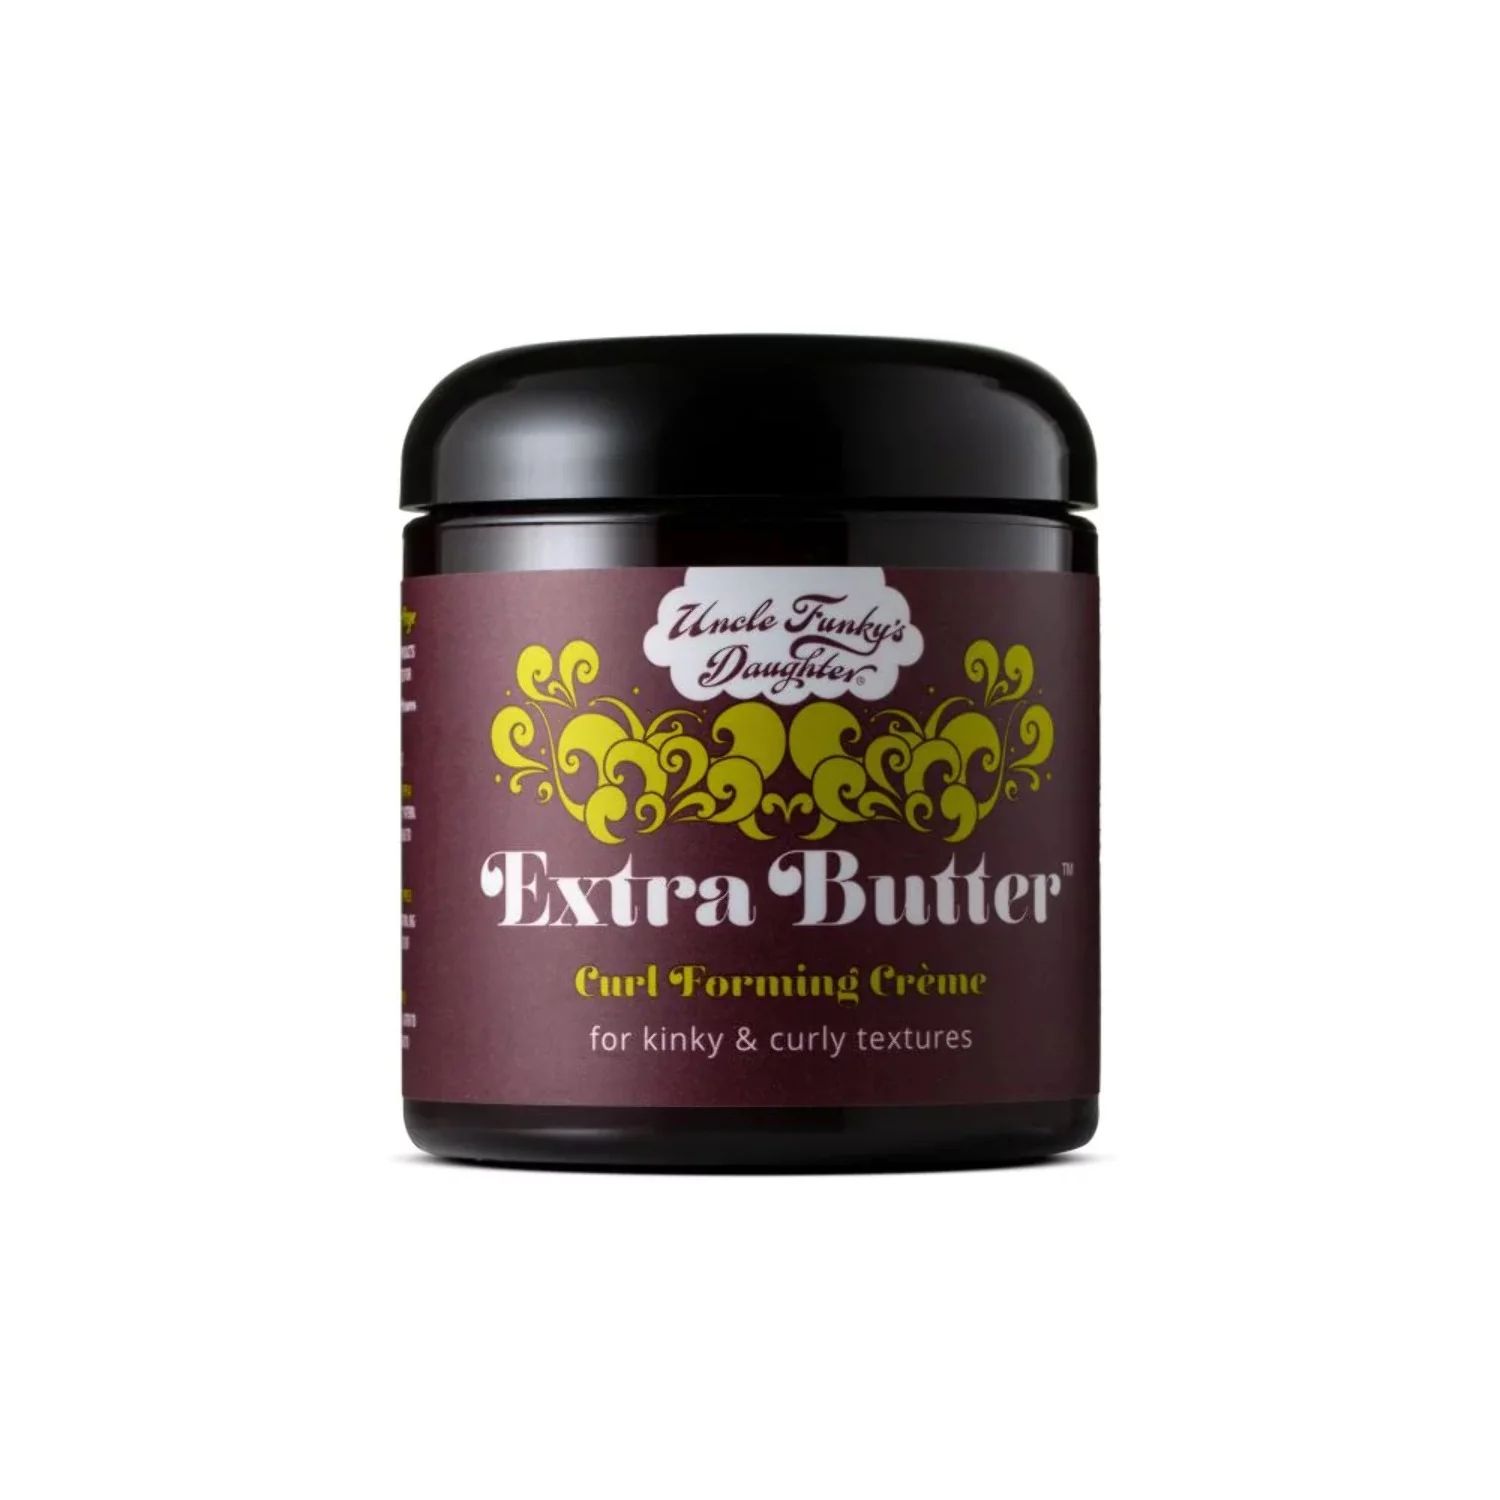 Uncle Funky's Daughter - Extra Butter Curl Forming Creme | Walmart (US)